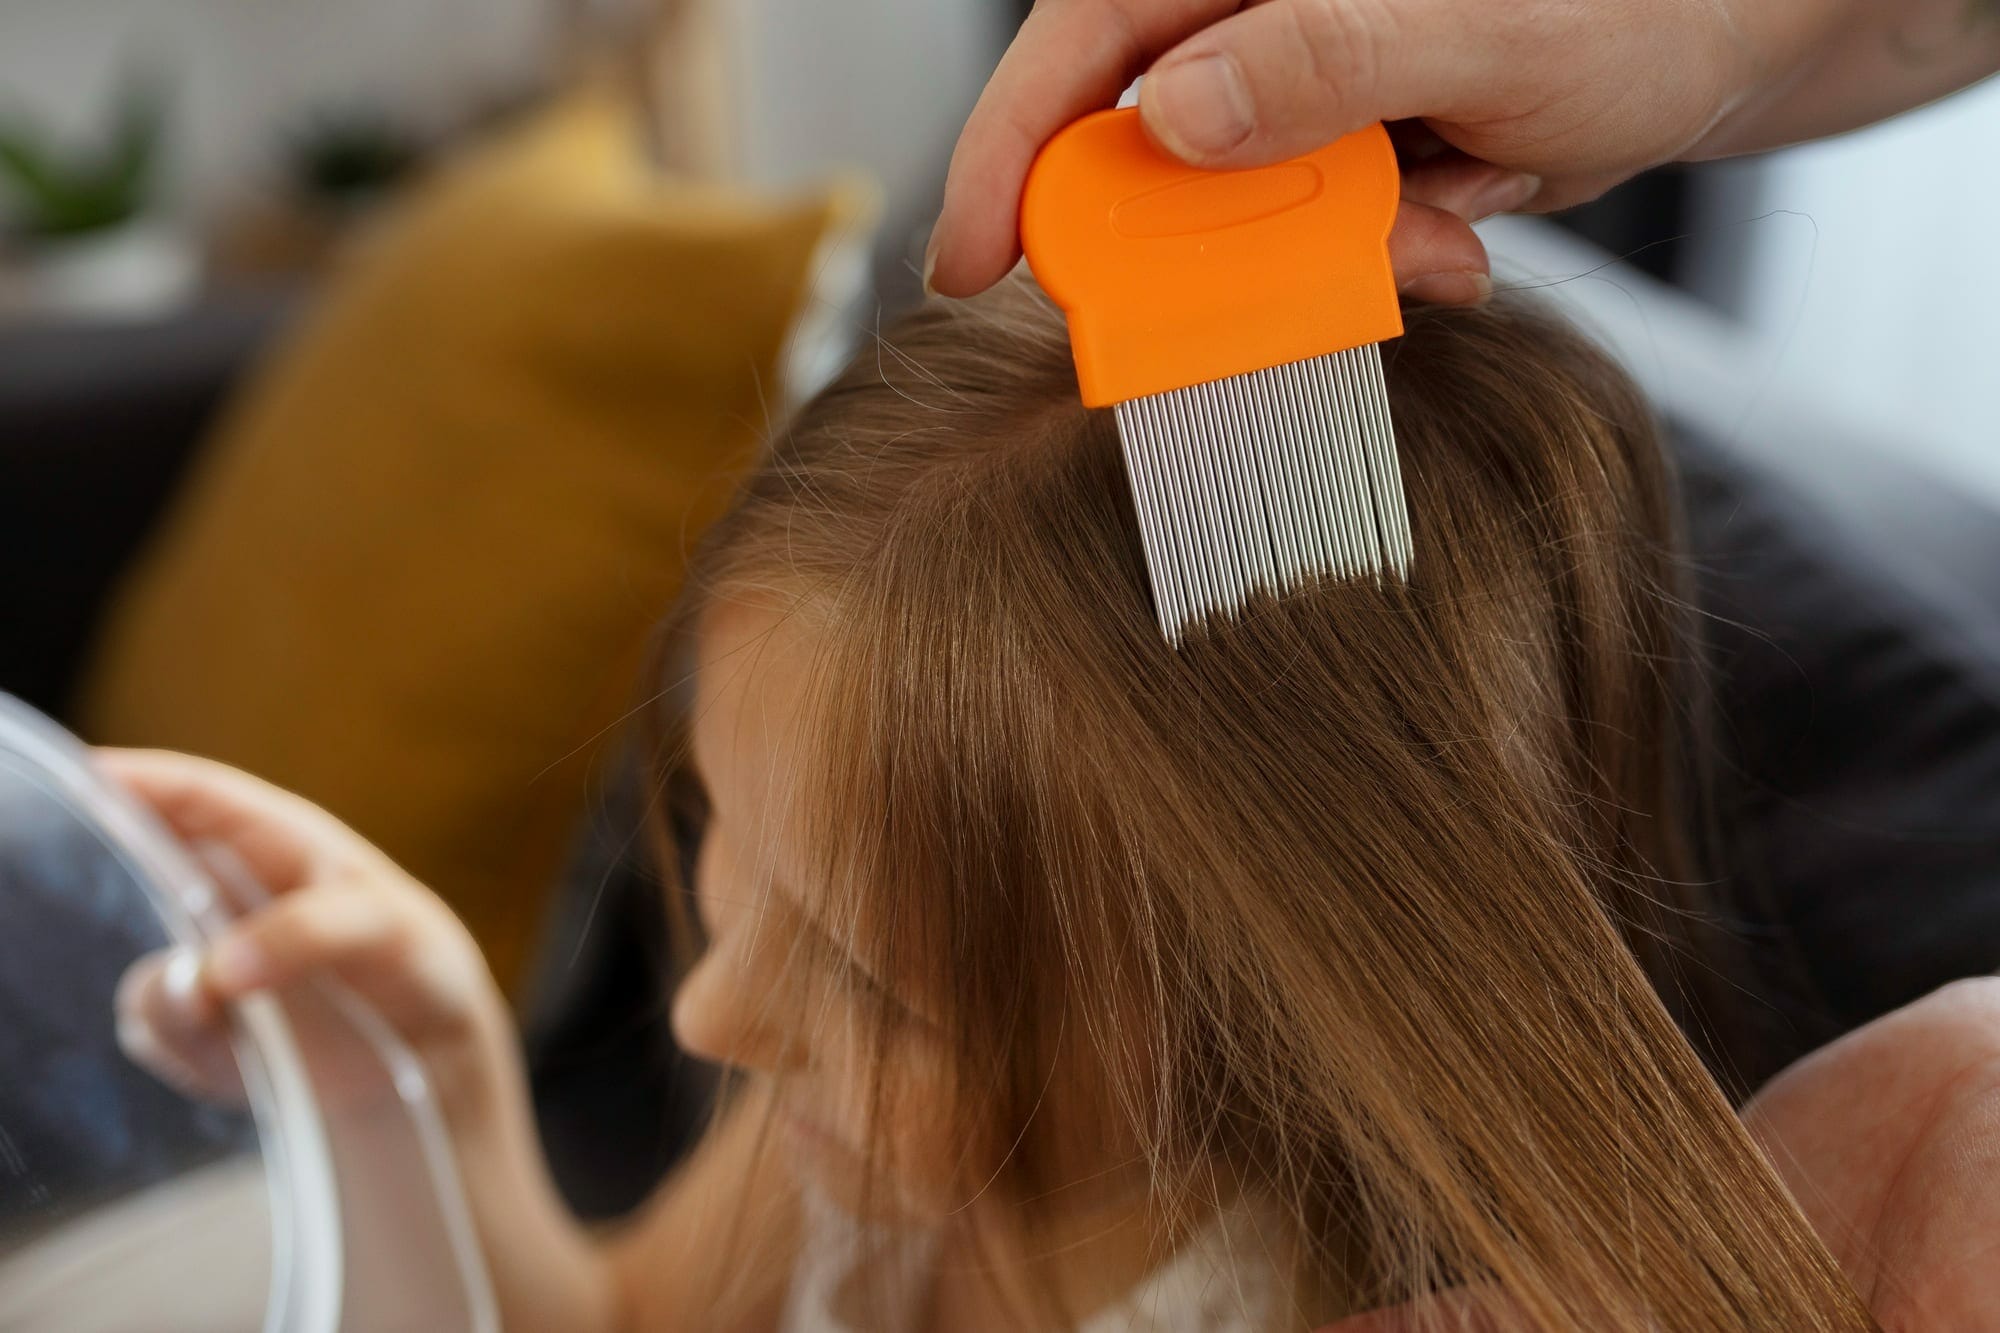 Lice: What do I need to know?